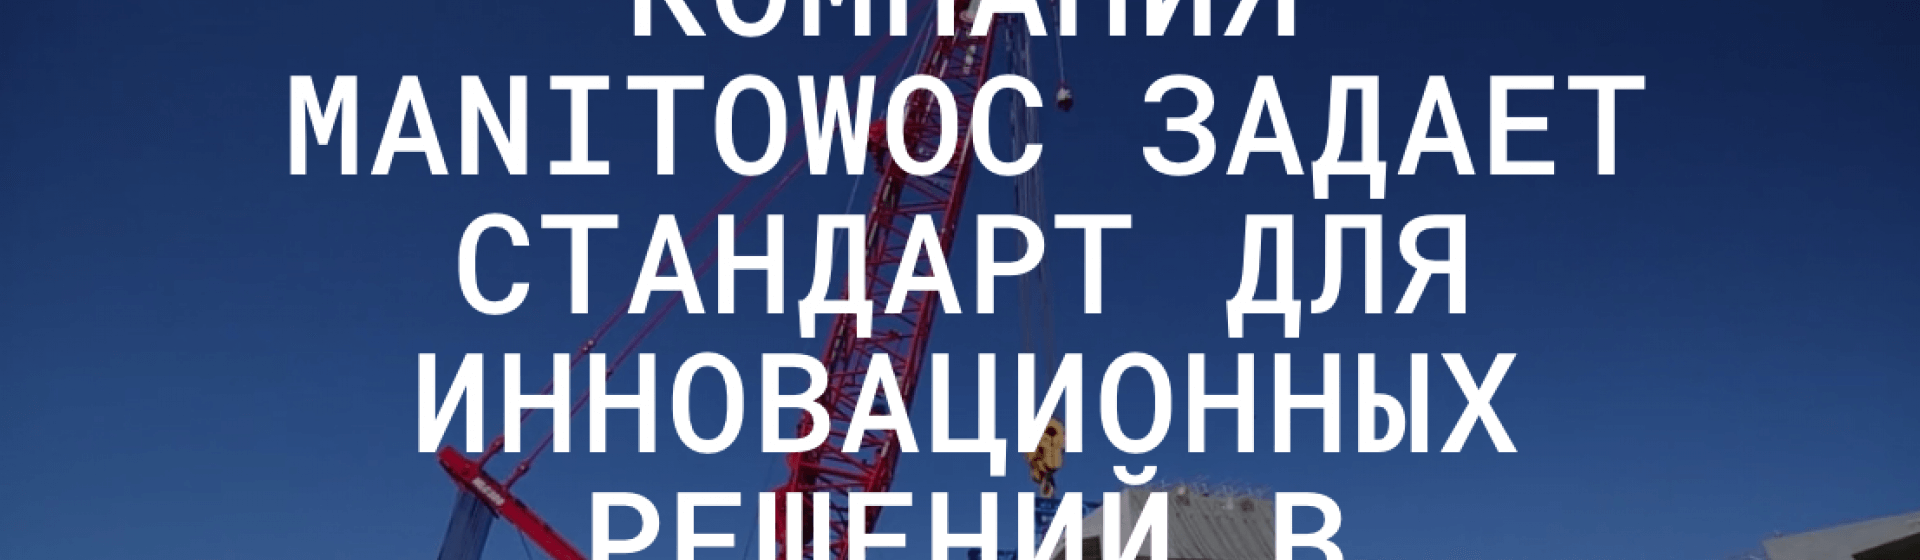 Manitowoc-launches-new-website_RU.png